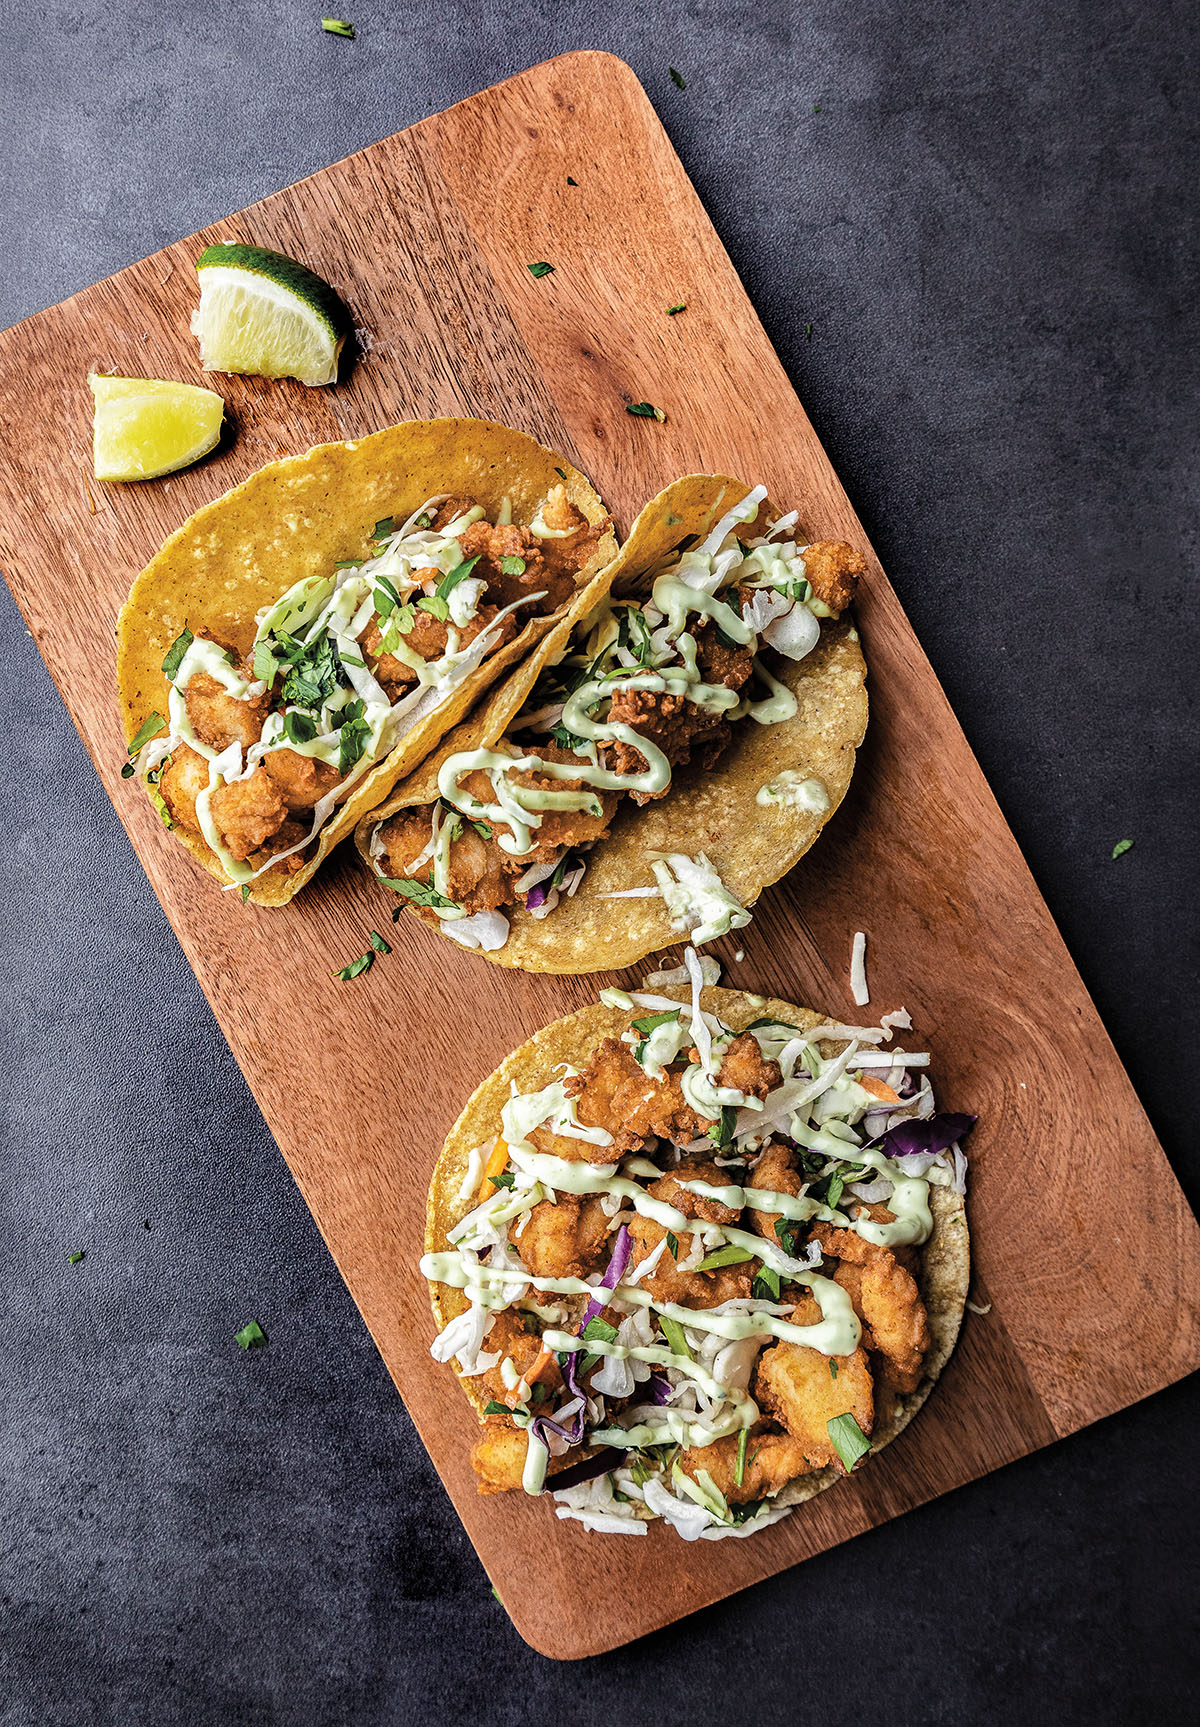 An overhead view of tacos on corn tortillas served on a wooden platter with limes